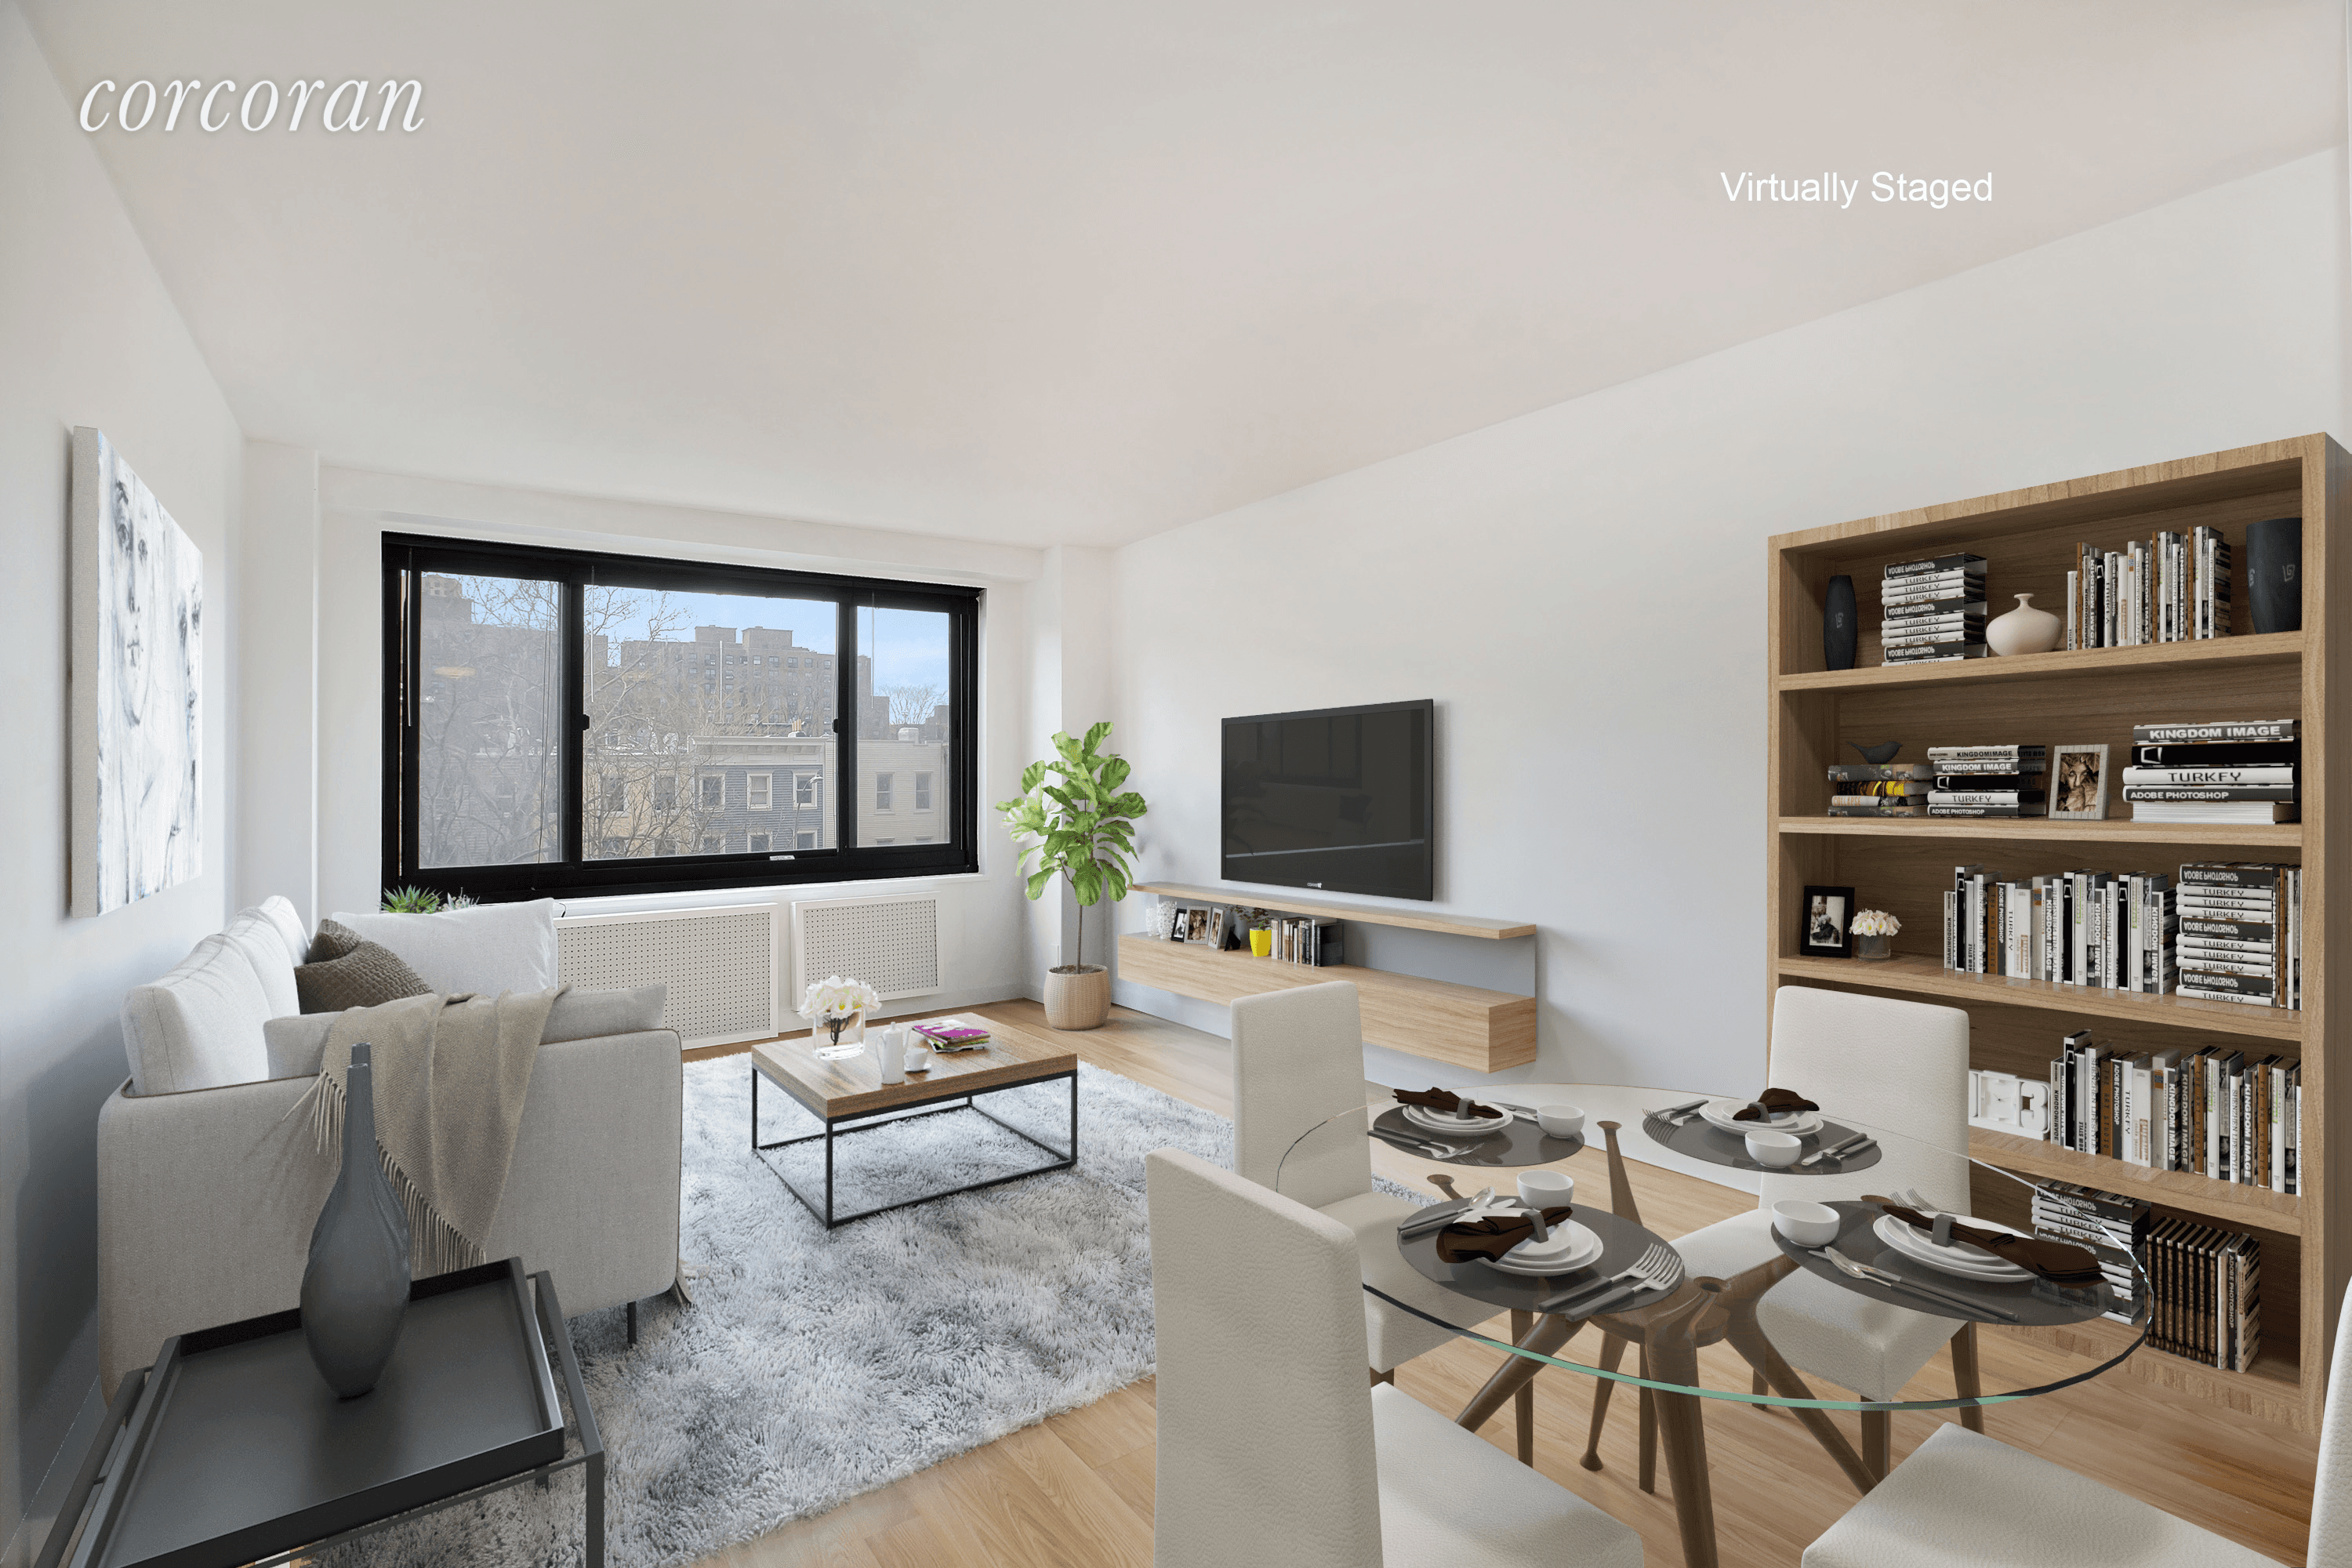 This lovely 1 bedroom 1 bathroom apartment is flooded with light and features walnut built in shelves, efficiently designed storage and an open living space perfect for entertaining.